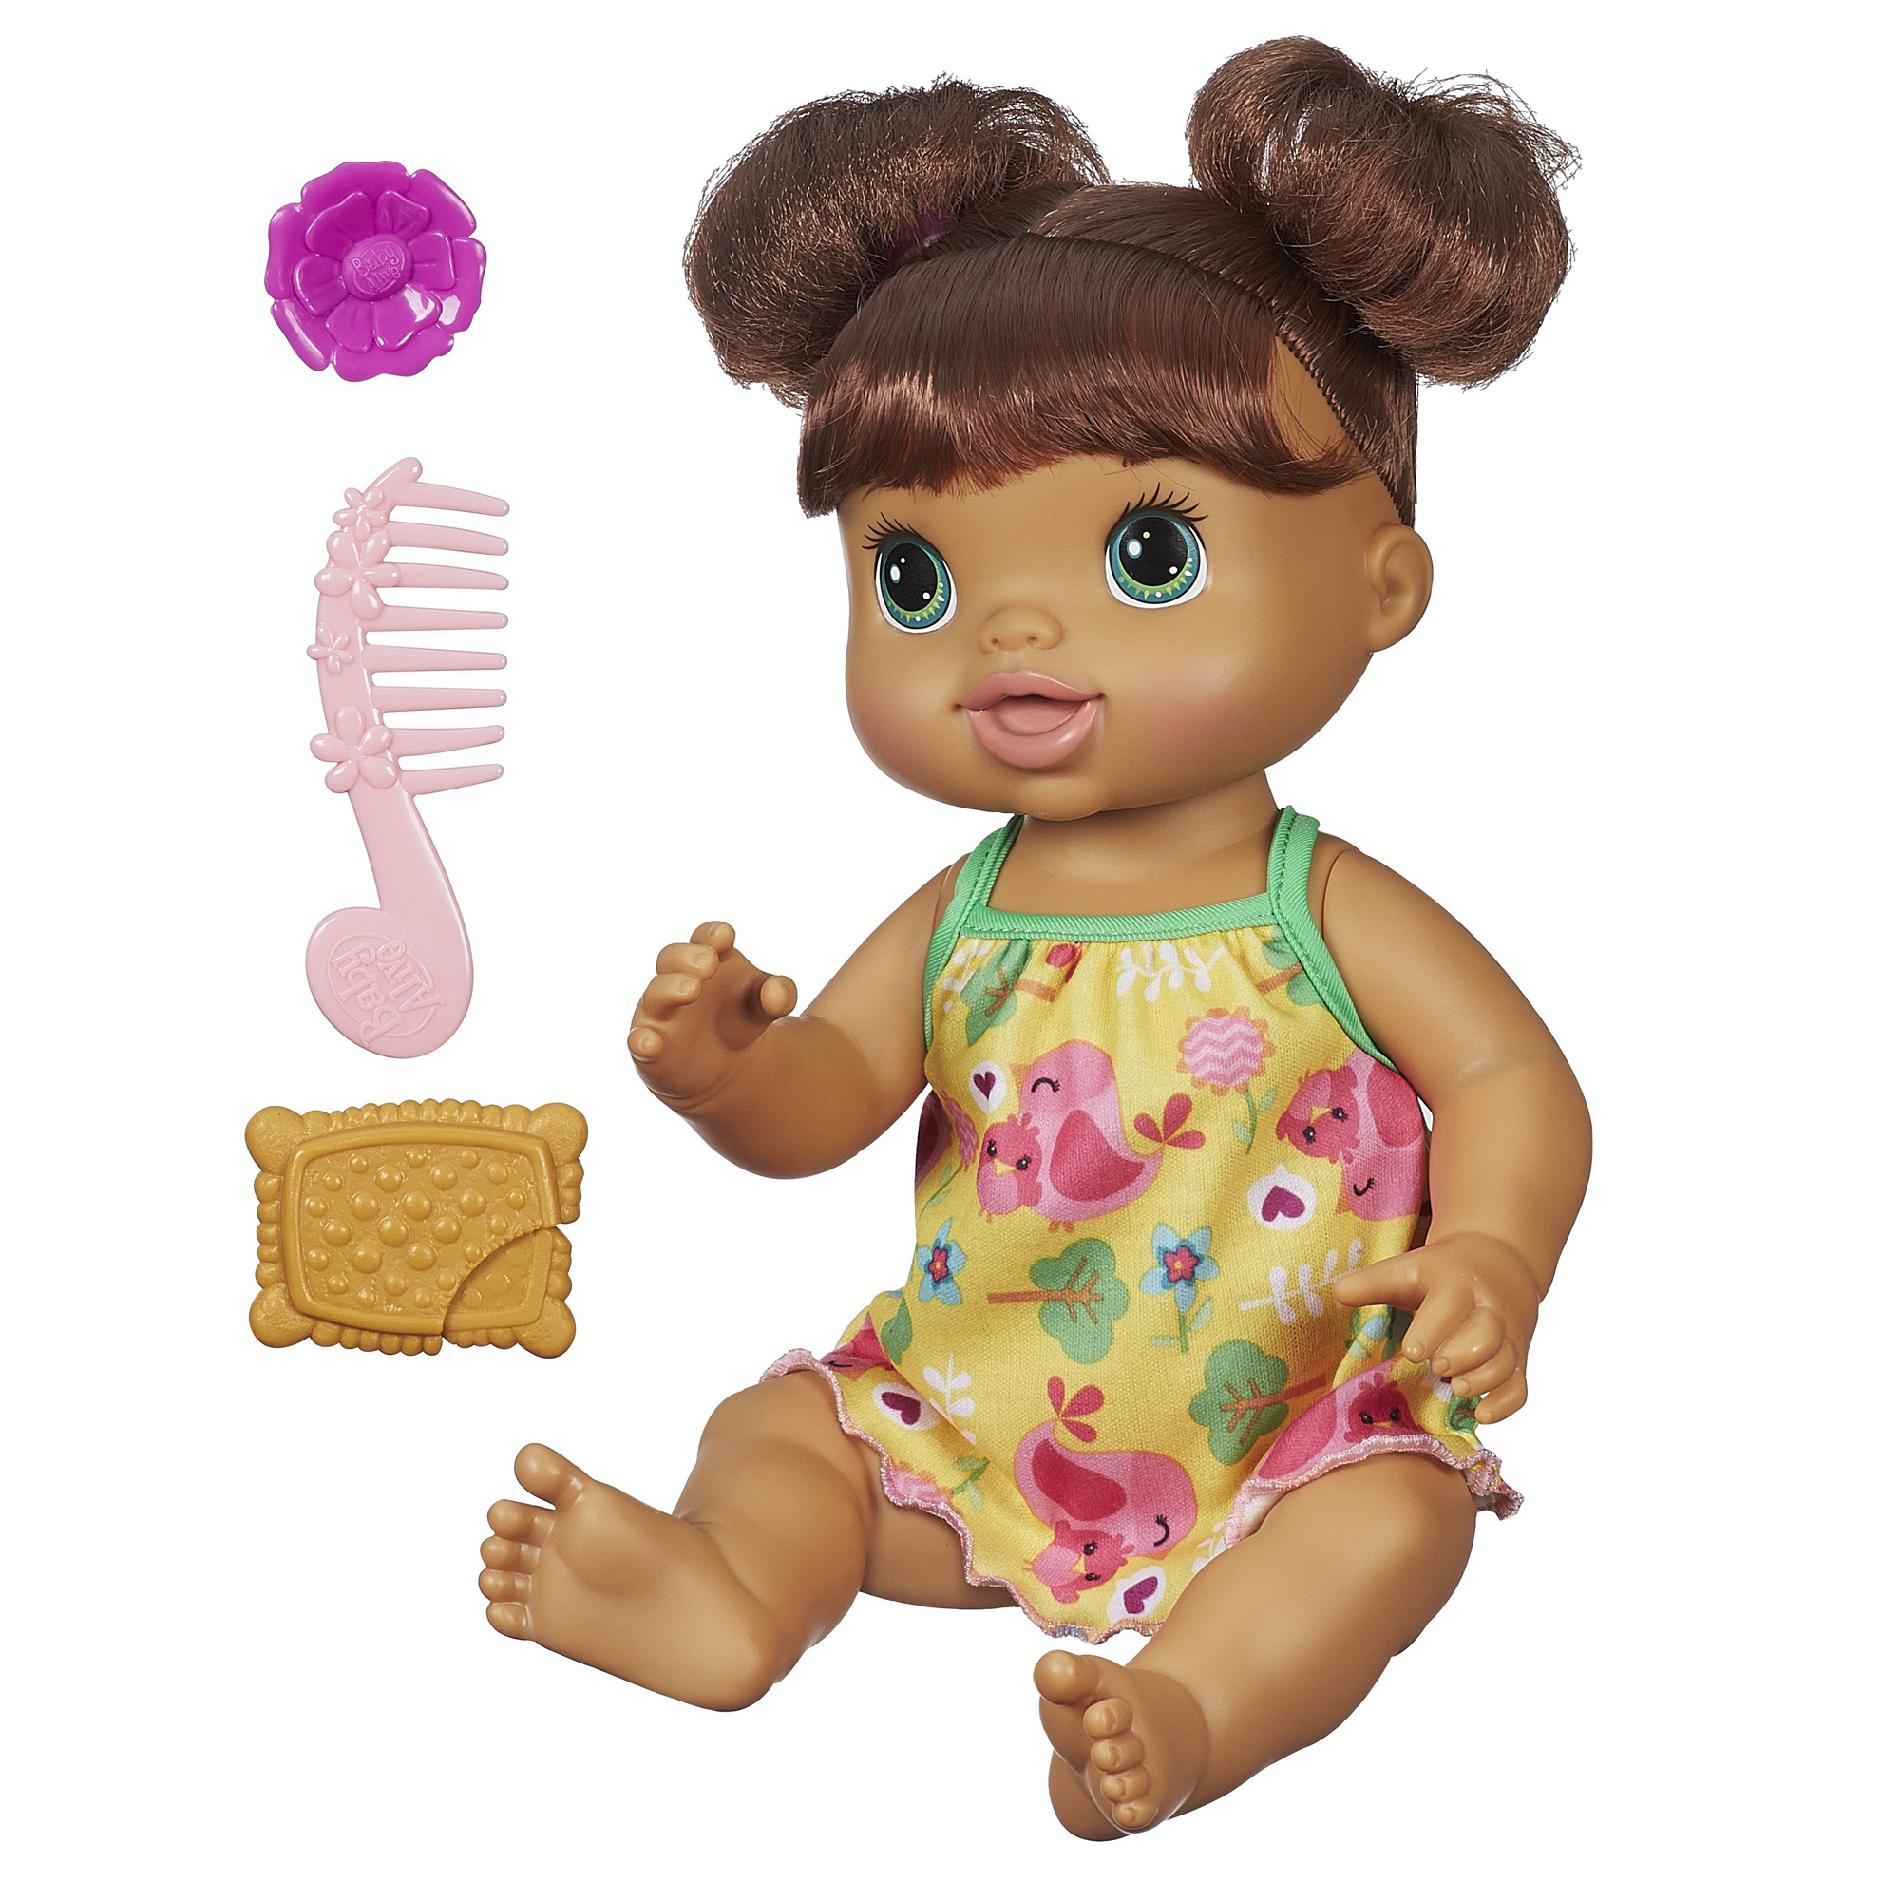 0630509244102 - PRETTY IN PIGTAILS BABY DOLL - BROWN HAIR